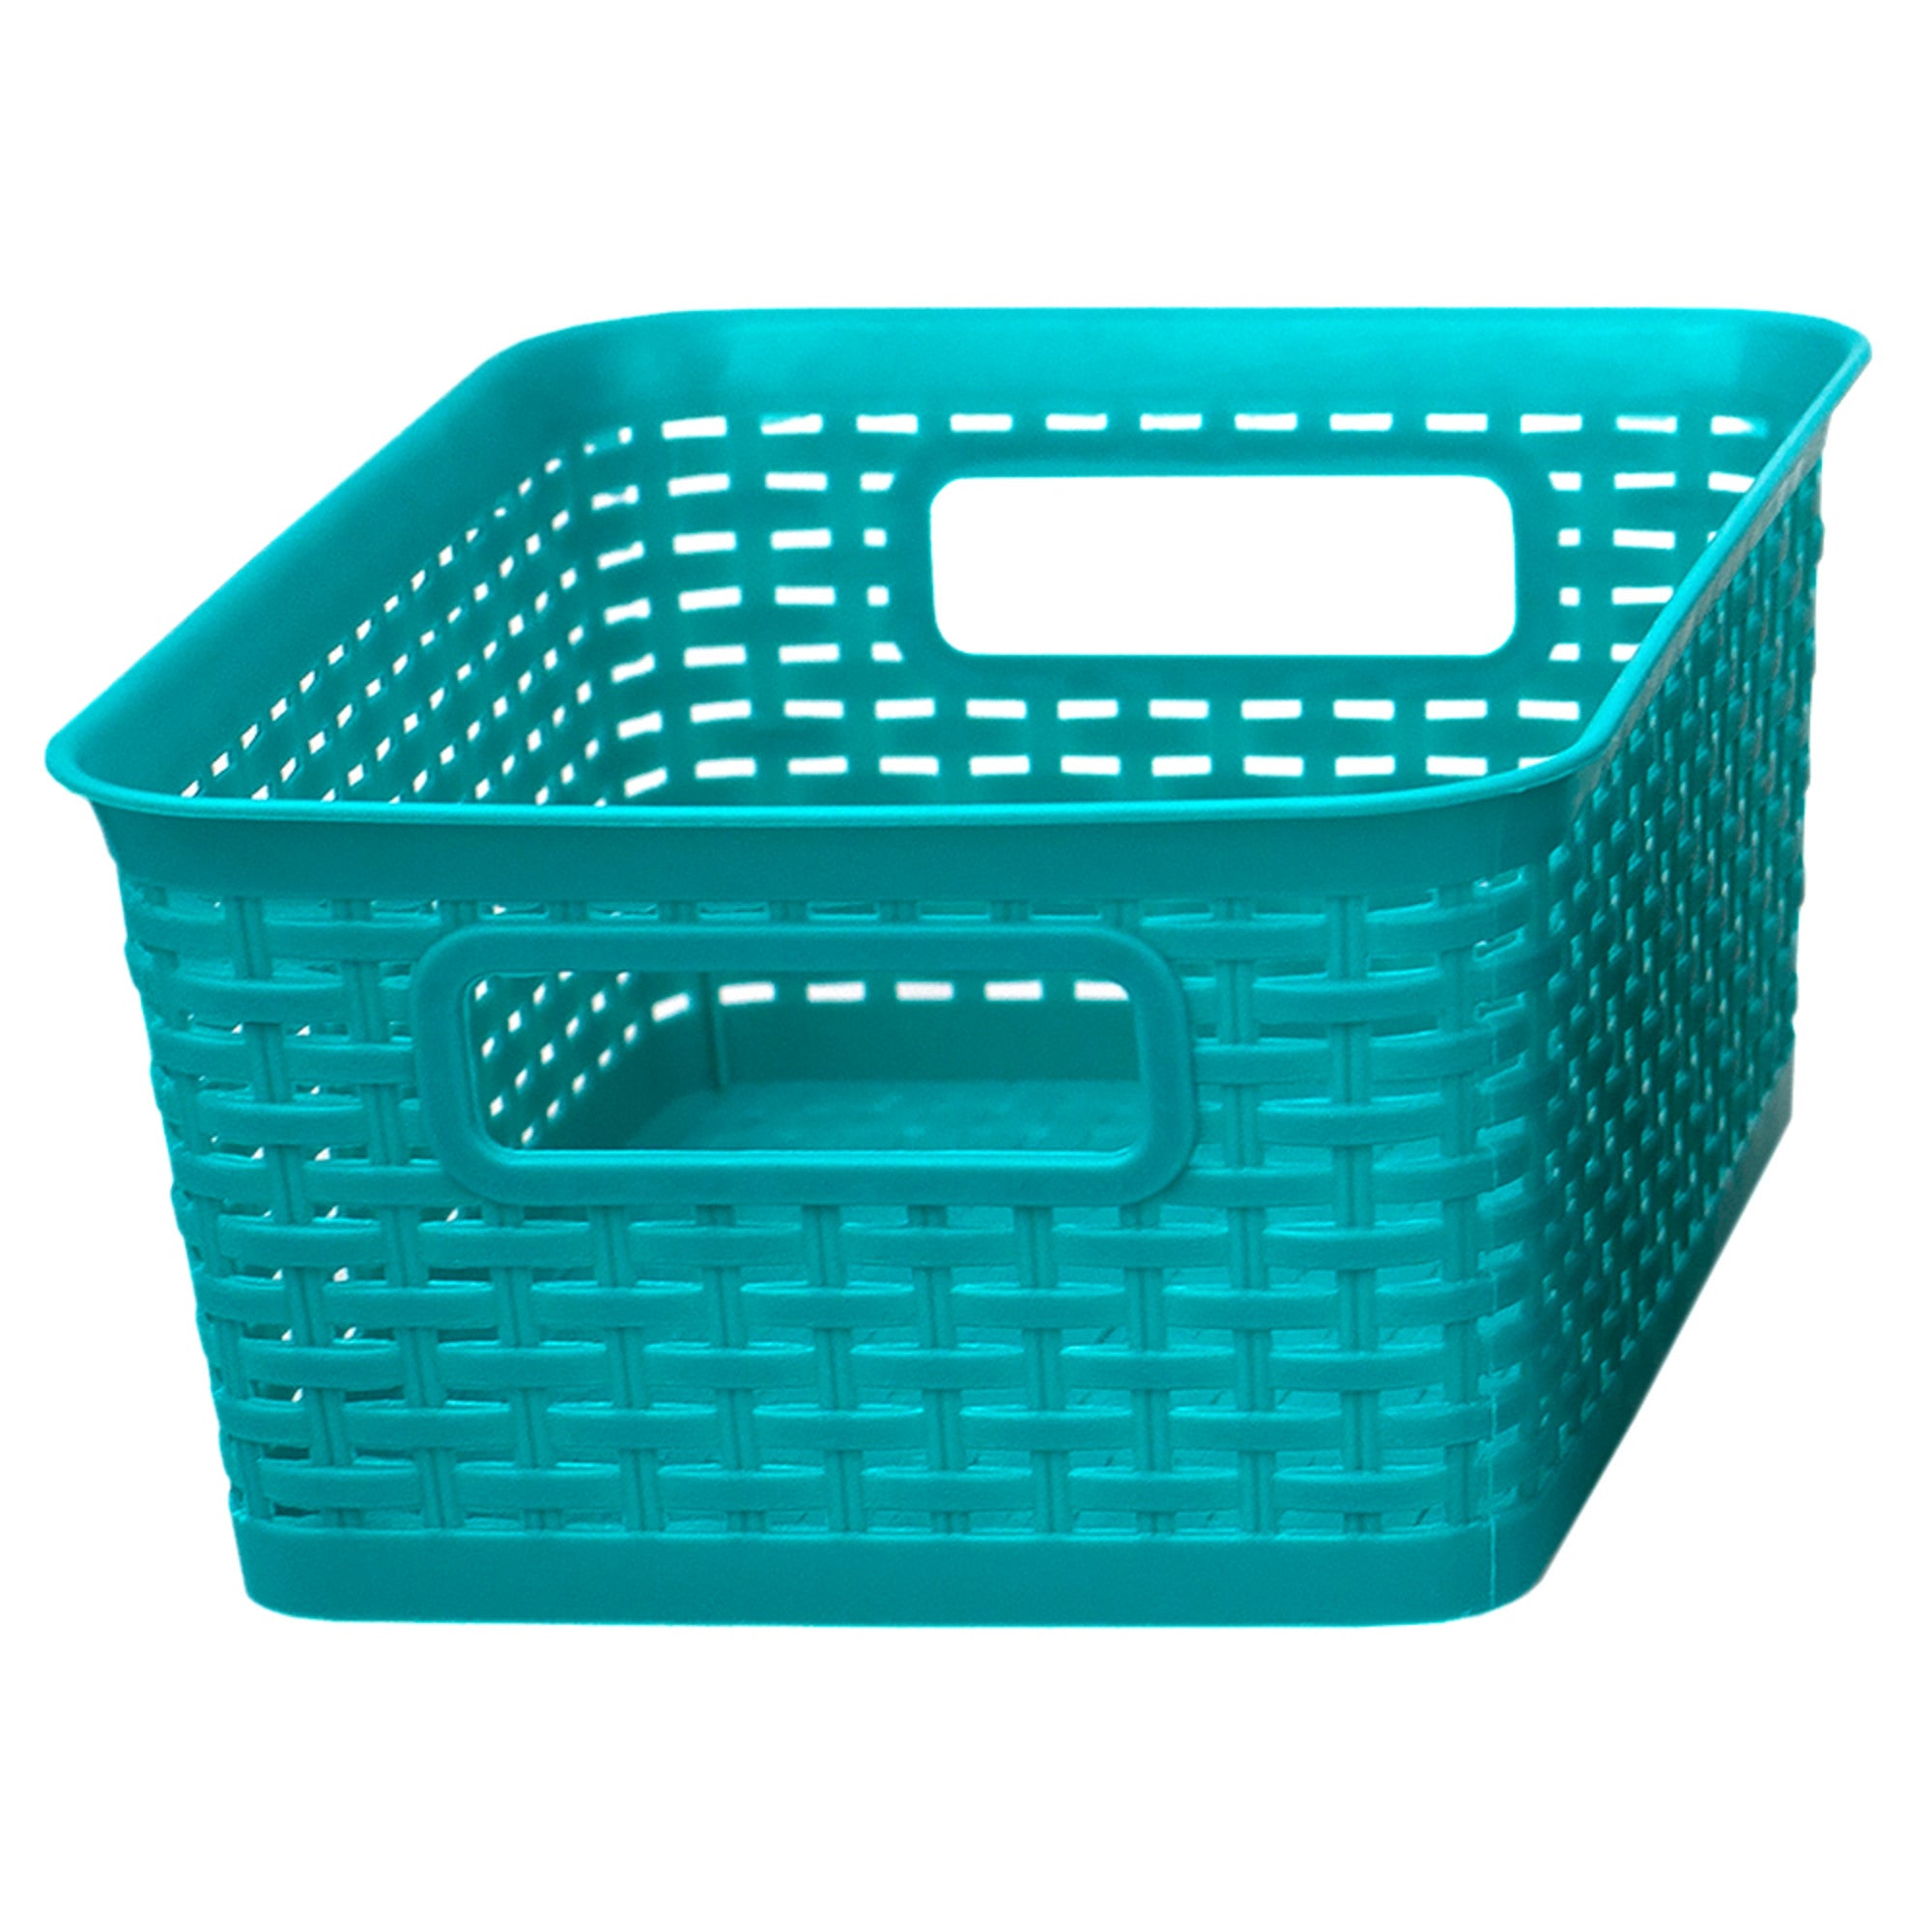 Home Basics  Medium Stackable Multi-Purpose Tightly Woven Plastic Basket with Cut-Out Handles - Assorted Colors